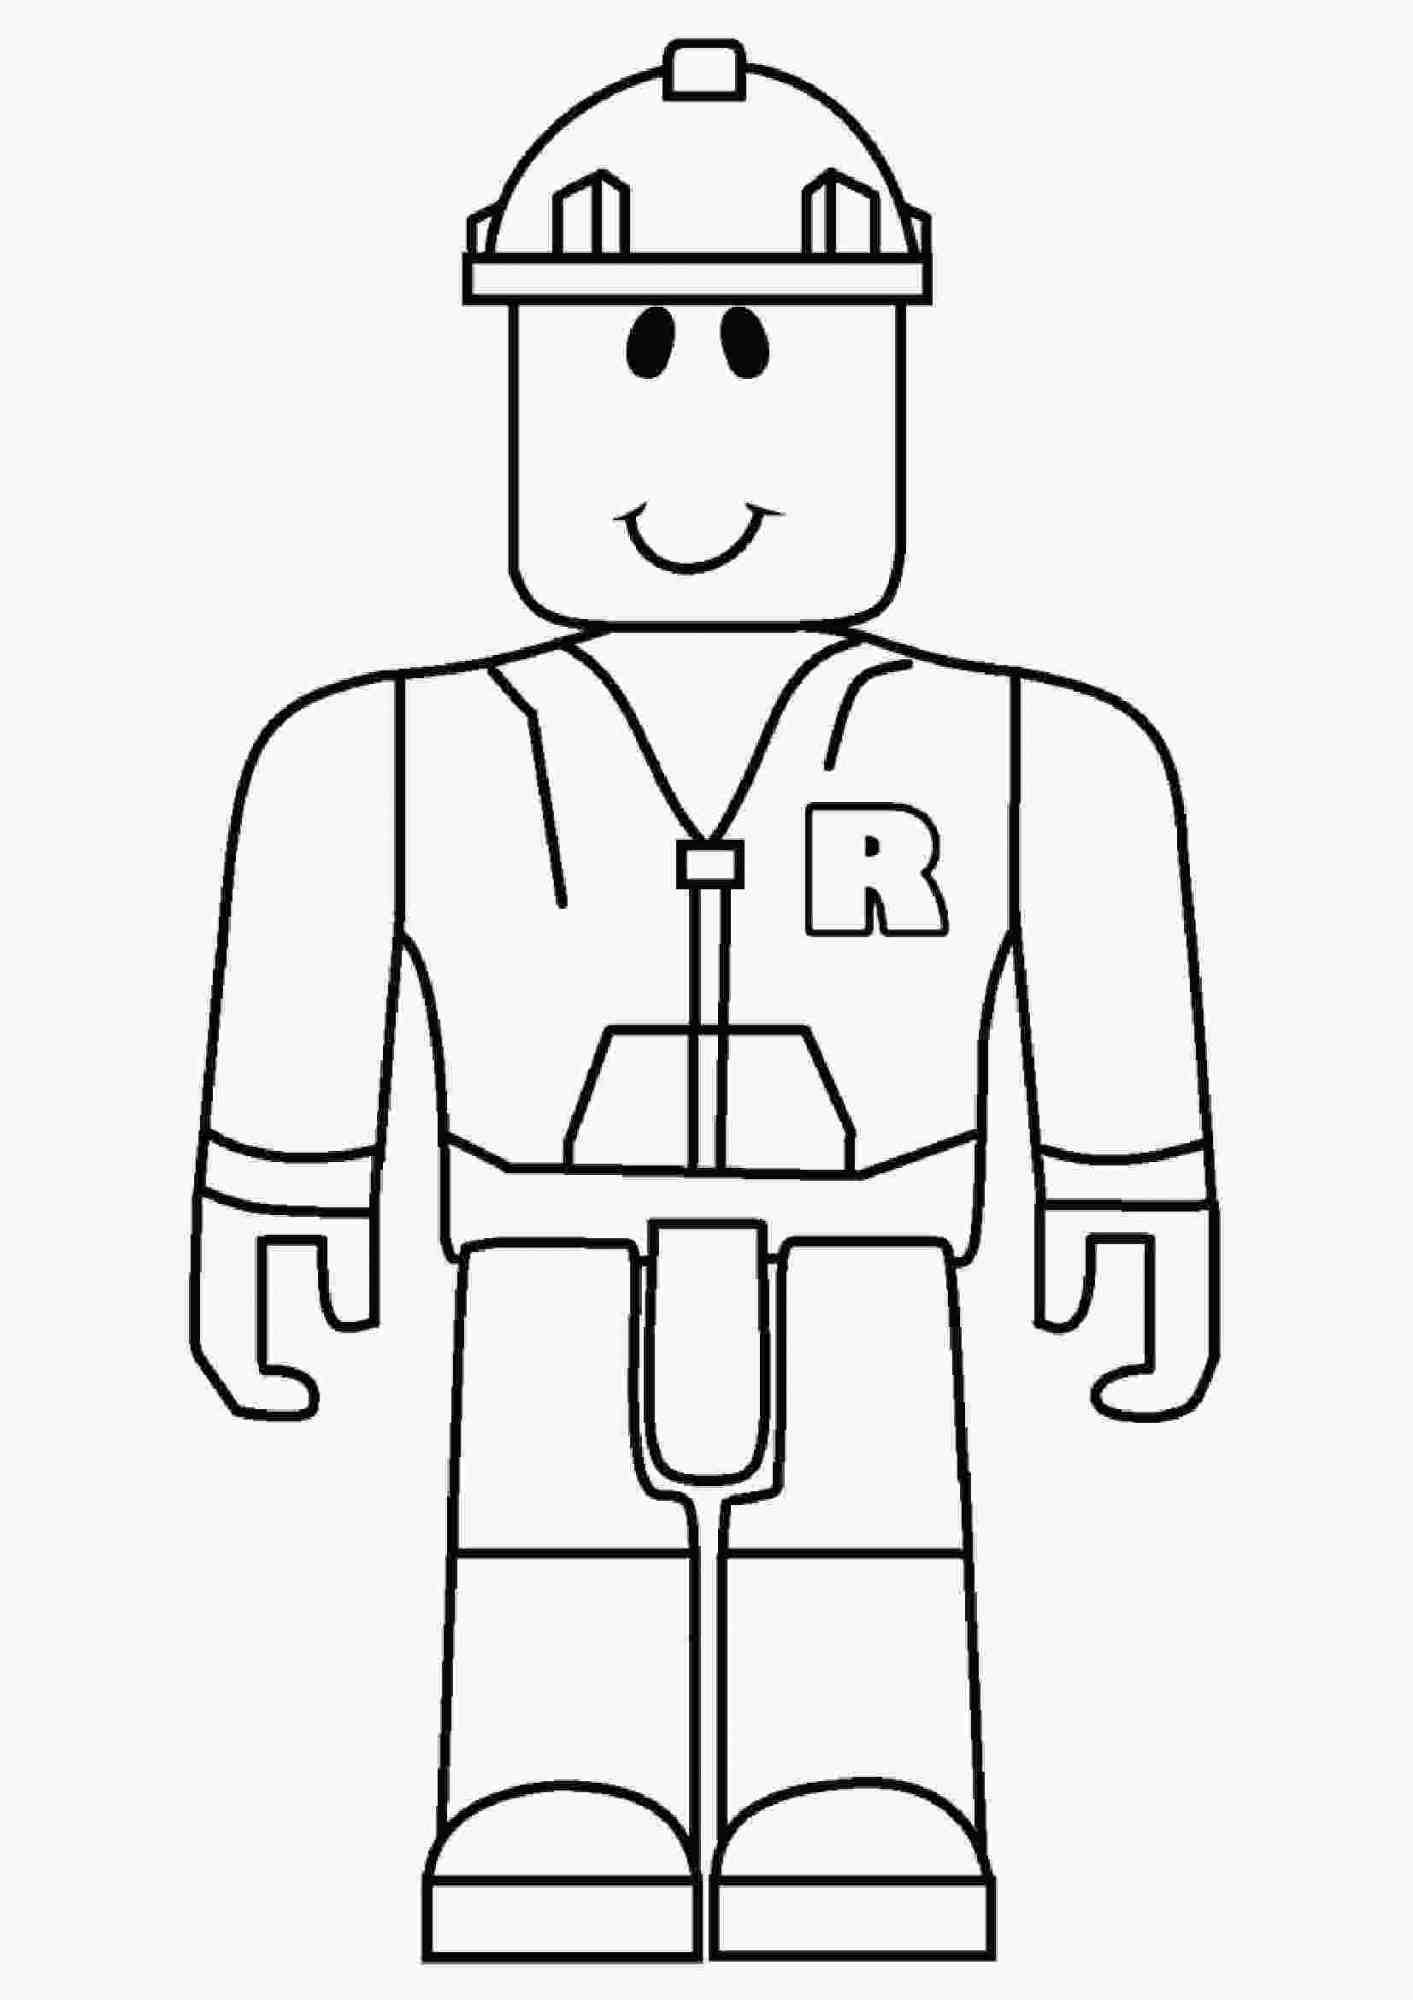 Roblox Builder With Letter R Symbol On Its Hoodie Coloring Page